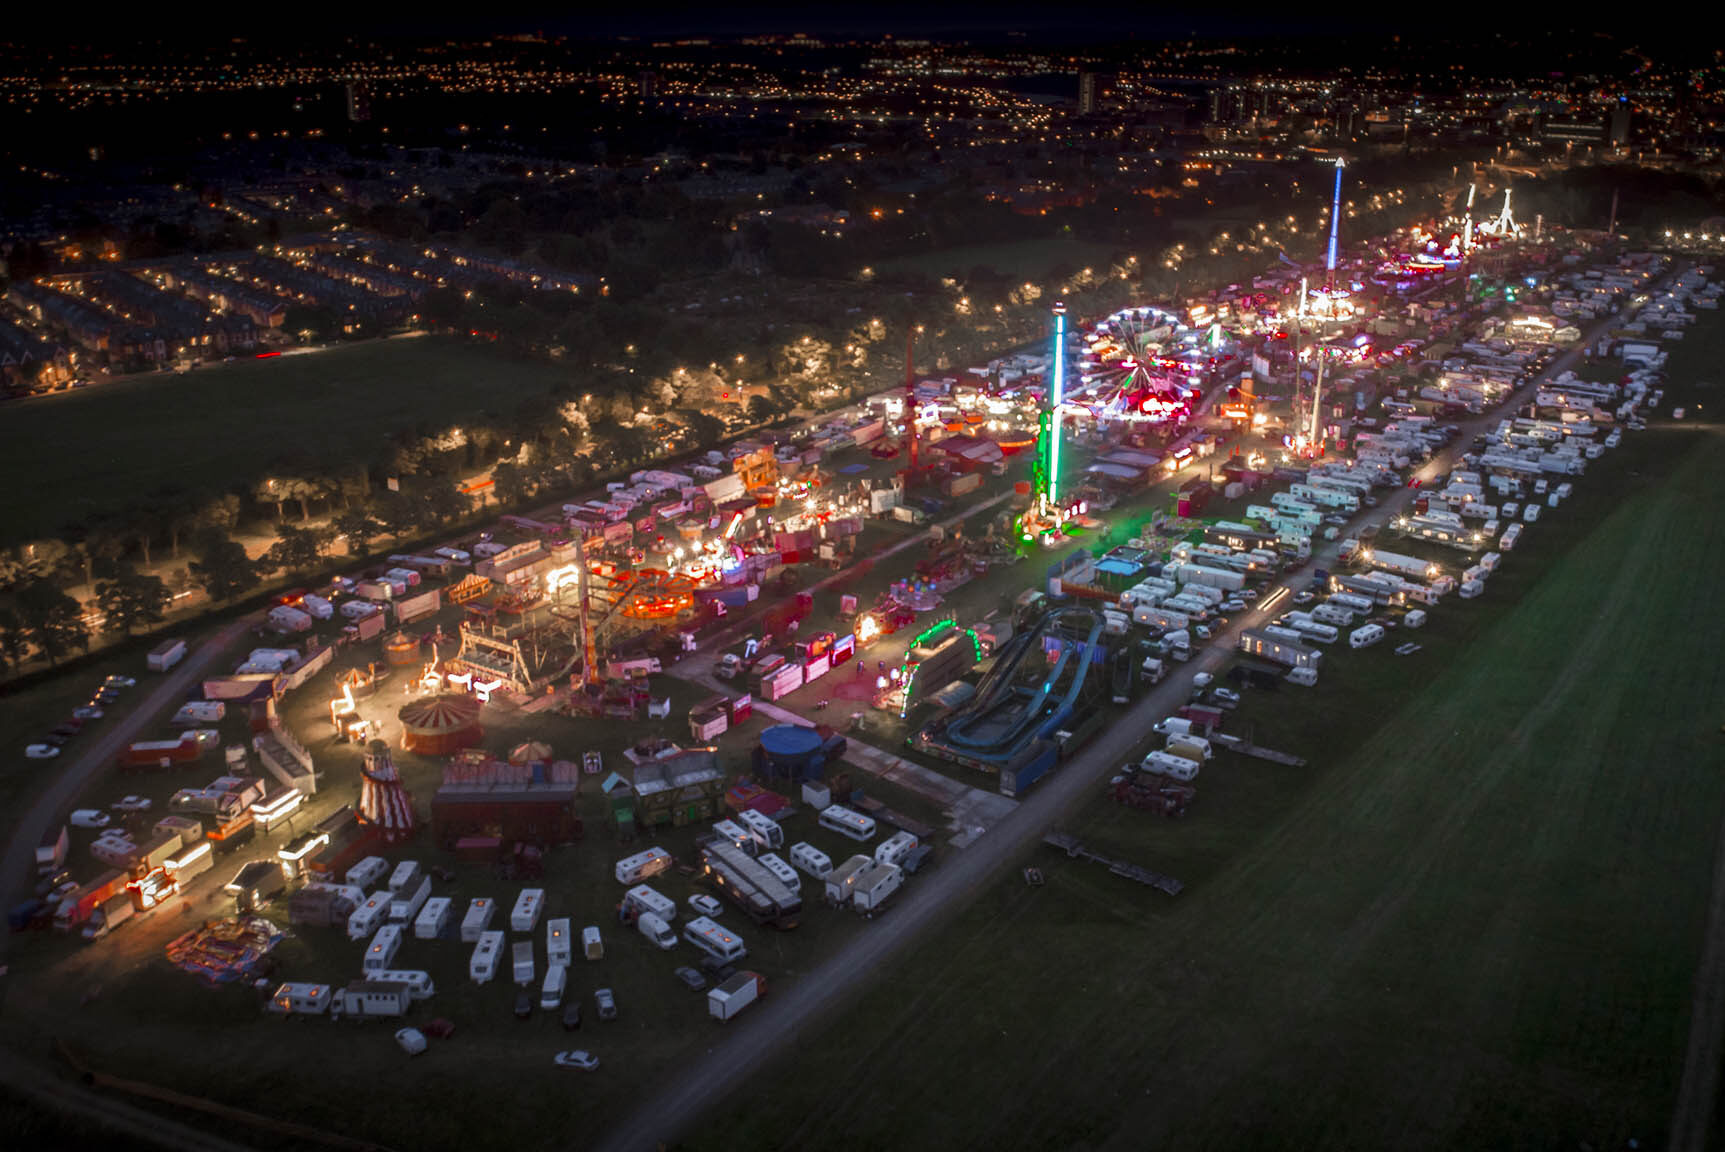 Largest travelling fair seen by drone. Night aerial photography